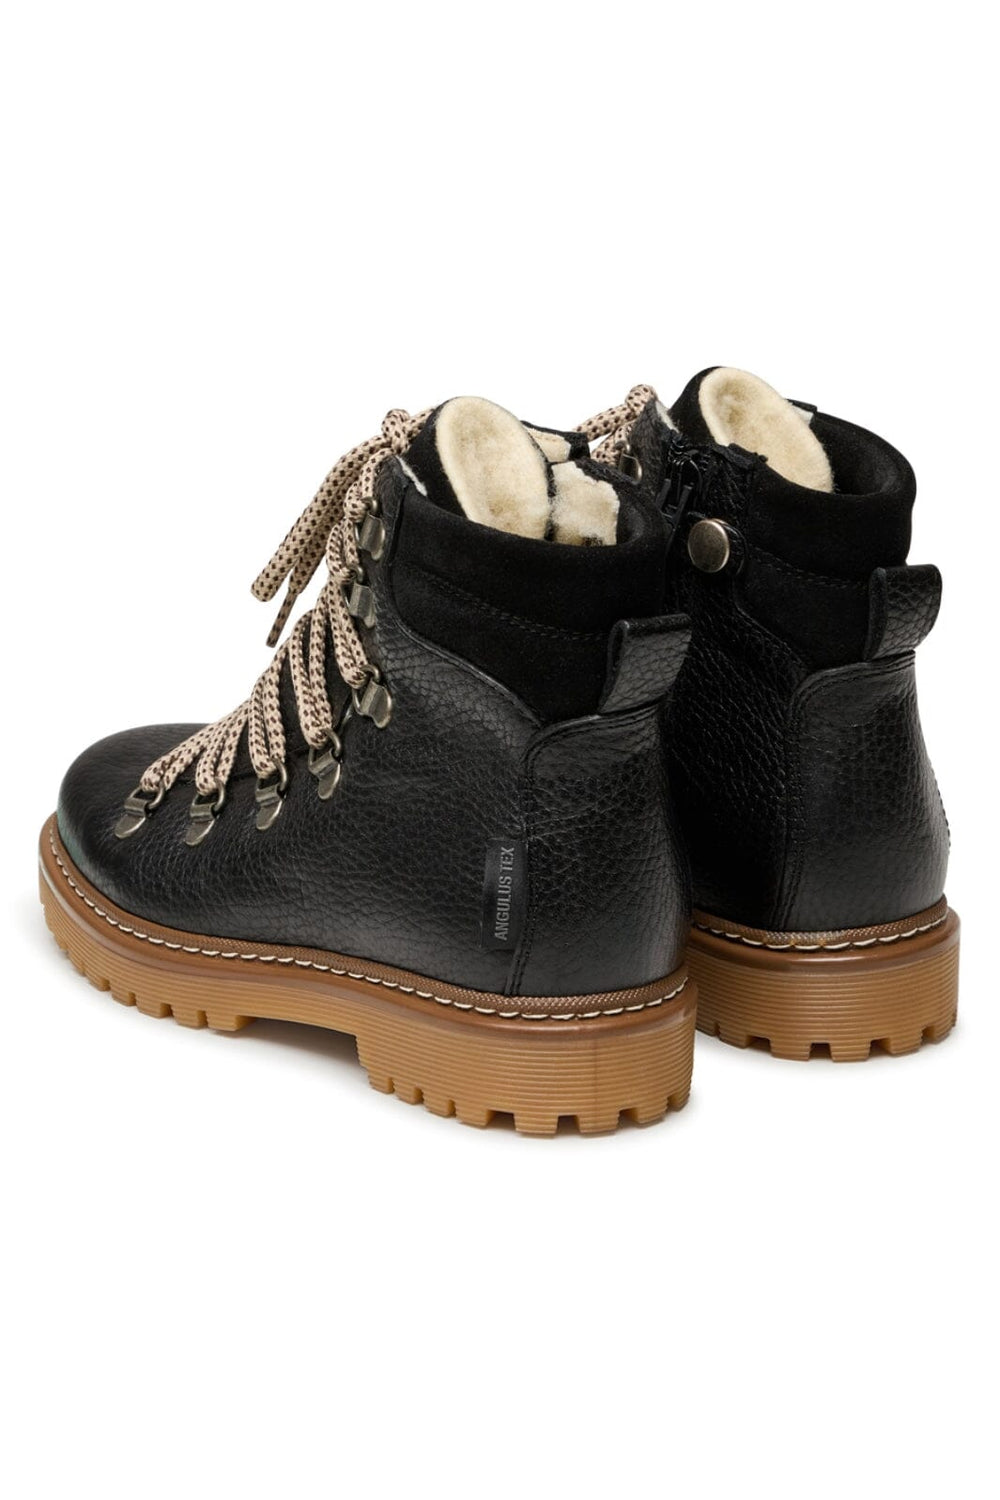 Angulus - TEX-boot with zipper and laces - 9084 Støvler 